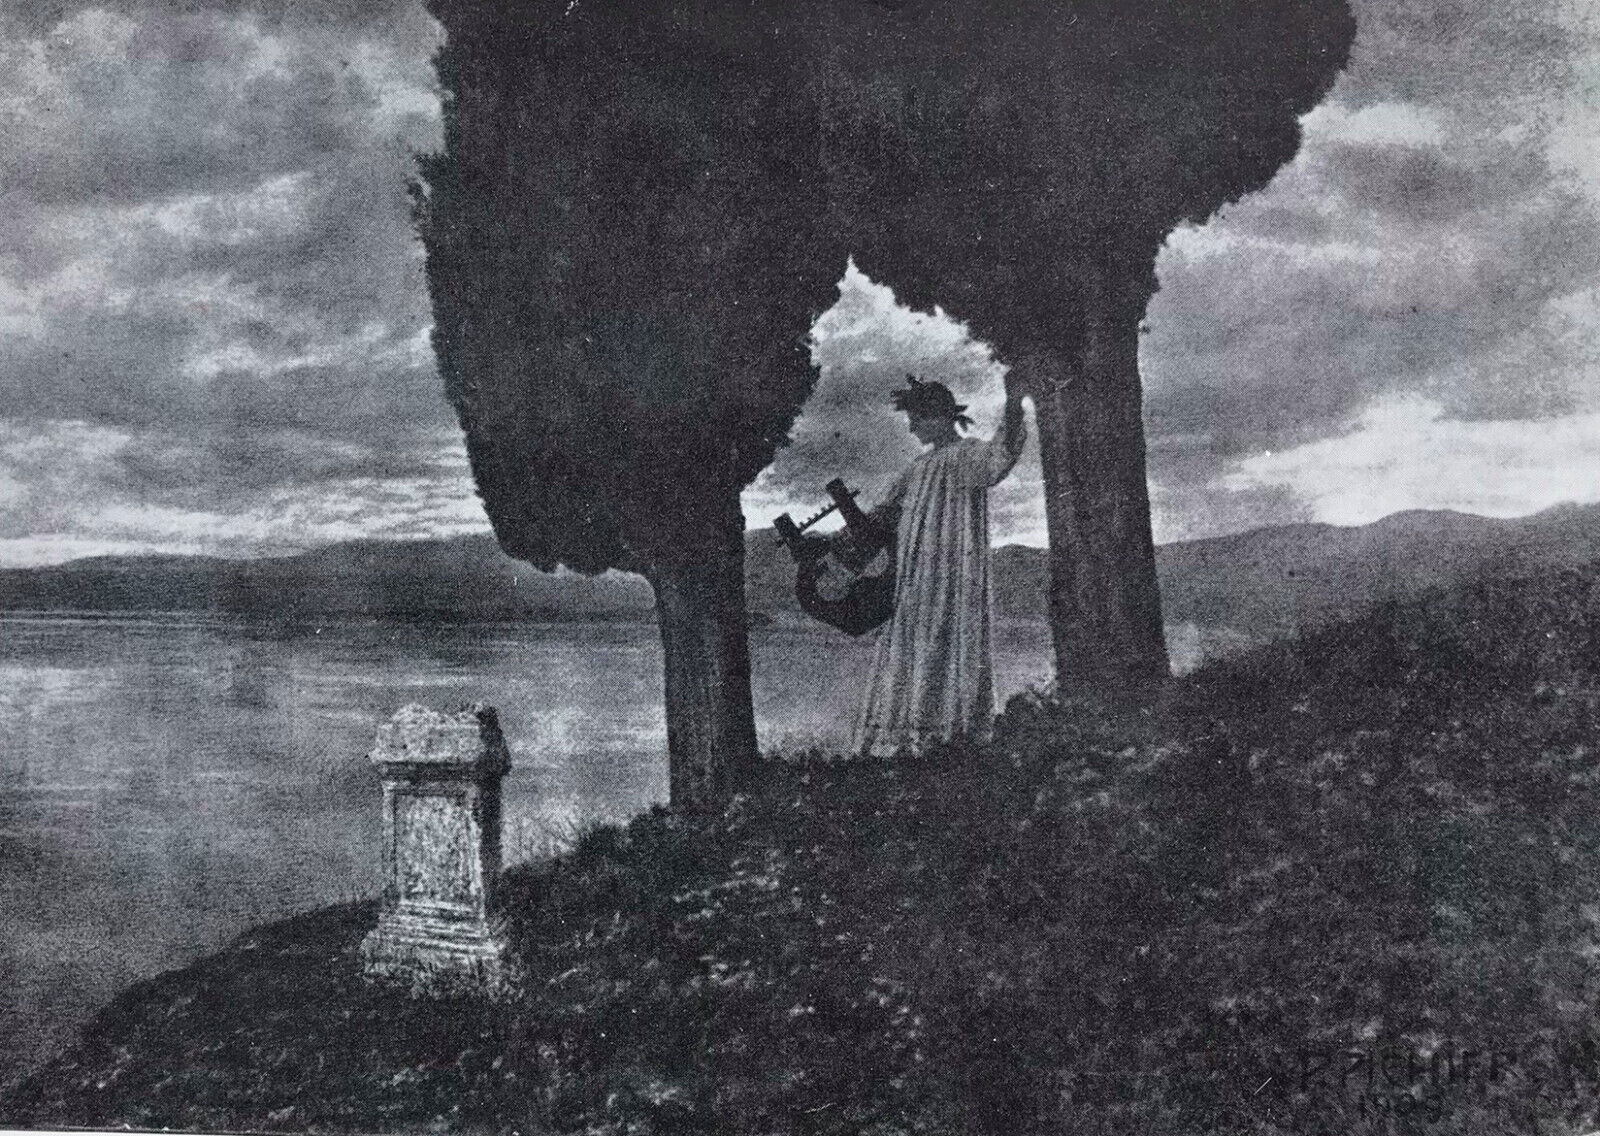 Paul Pichier pictorialist print Shepherd and Cypresses 1910